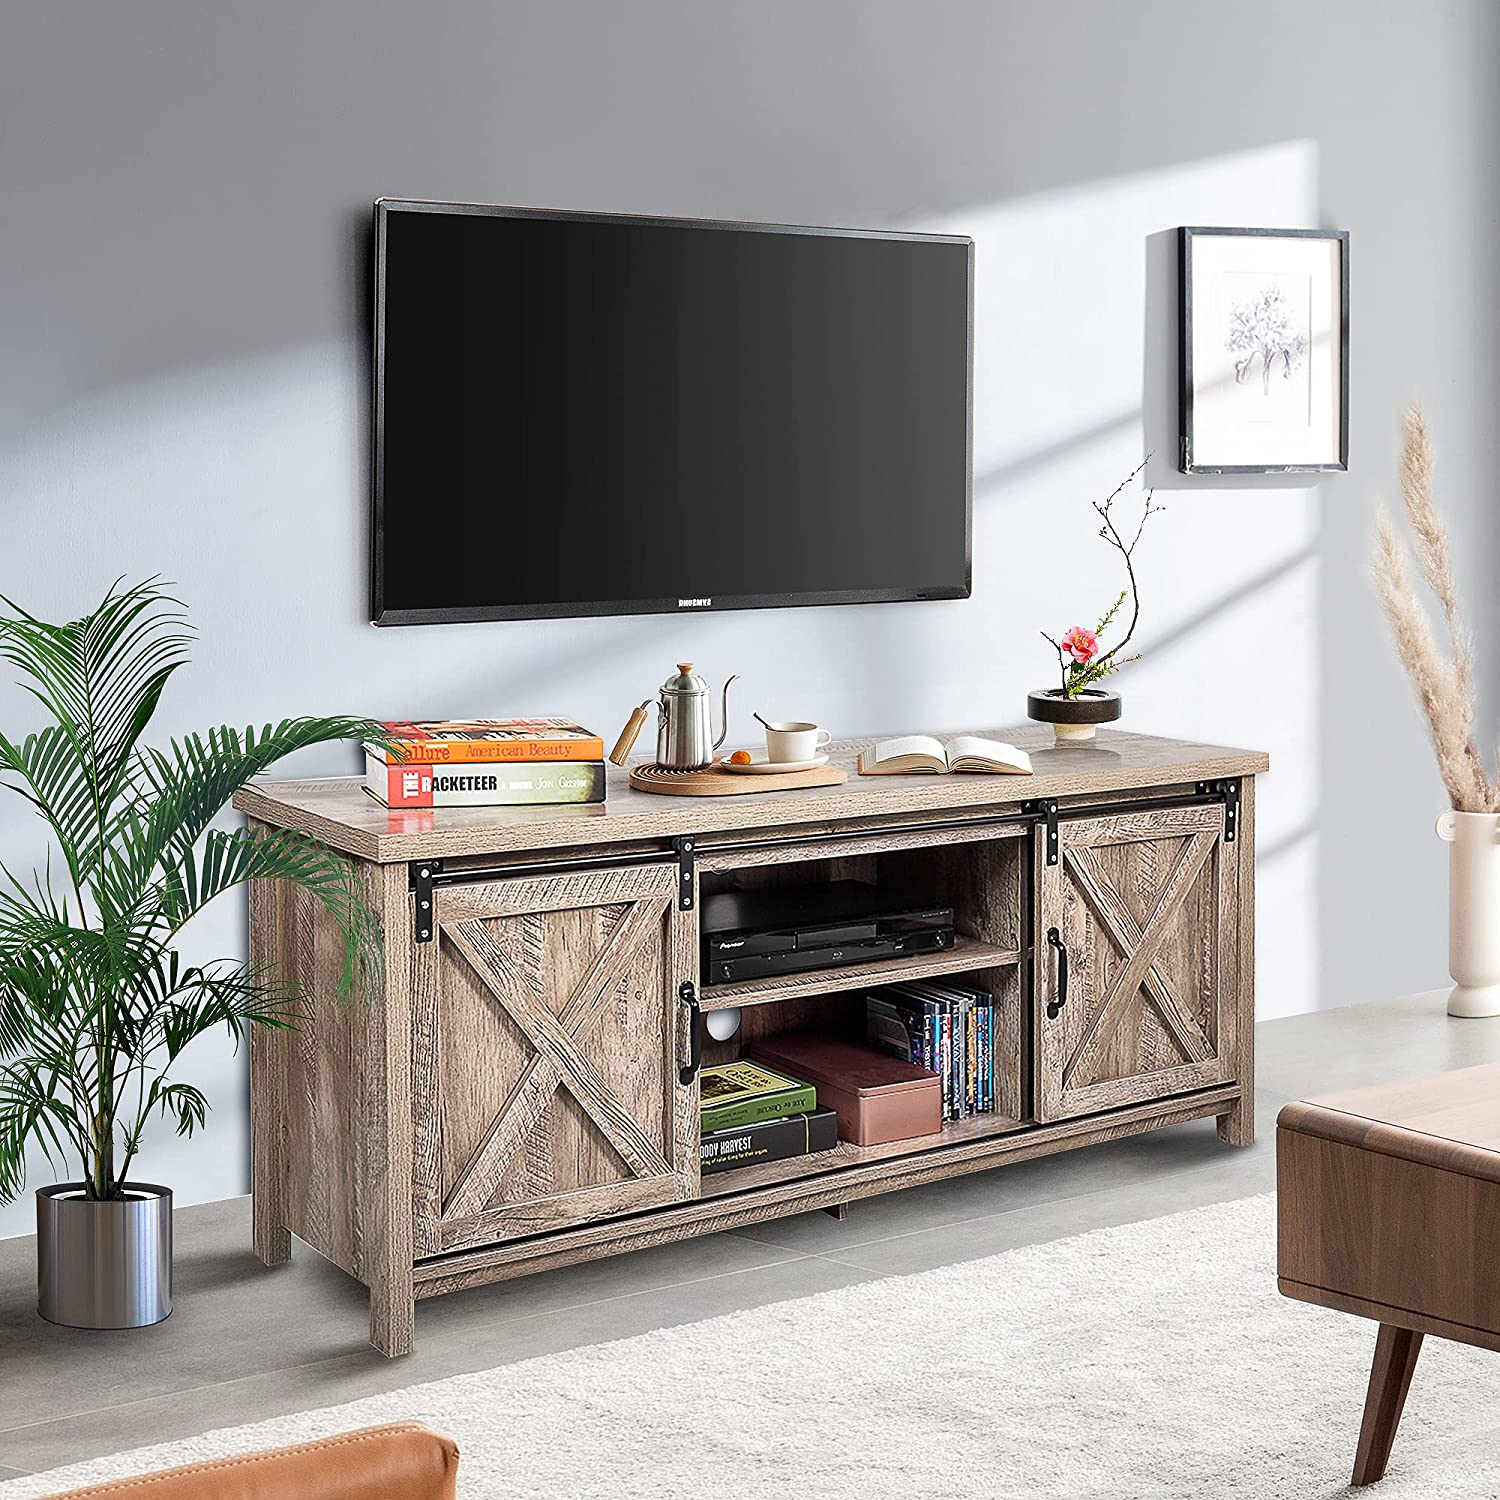 Lowestbest TV Cabinet with Sliding Wood Barn Doors, Television Stands Cabinet Console for Living Room Bedroom, Rustic Natural - image 1 of 8